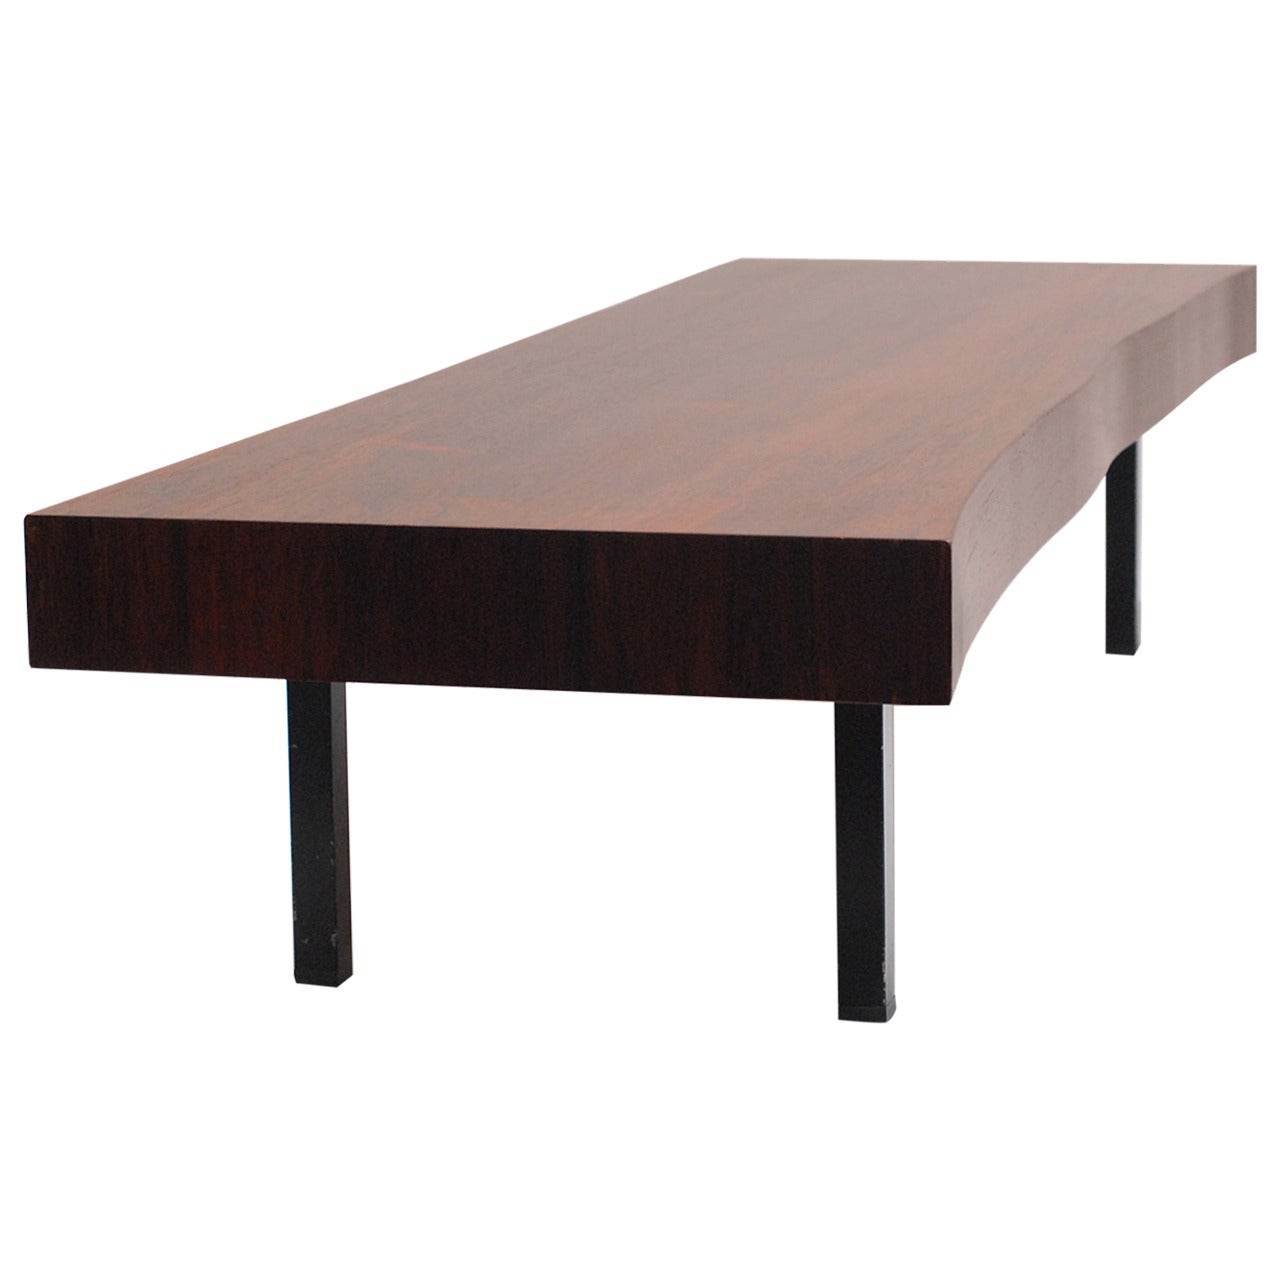 1965 Rare Alfred Hendrickx Rosewood Bench or Coffee Table for Belform